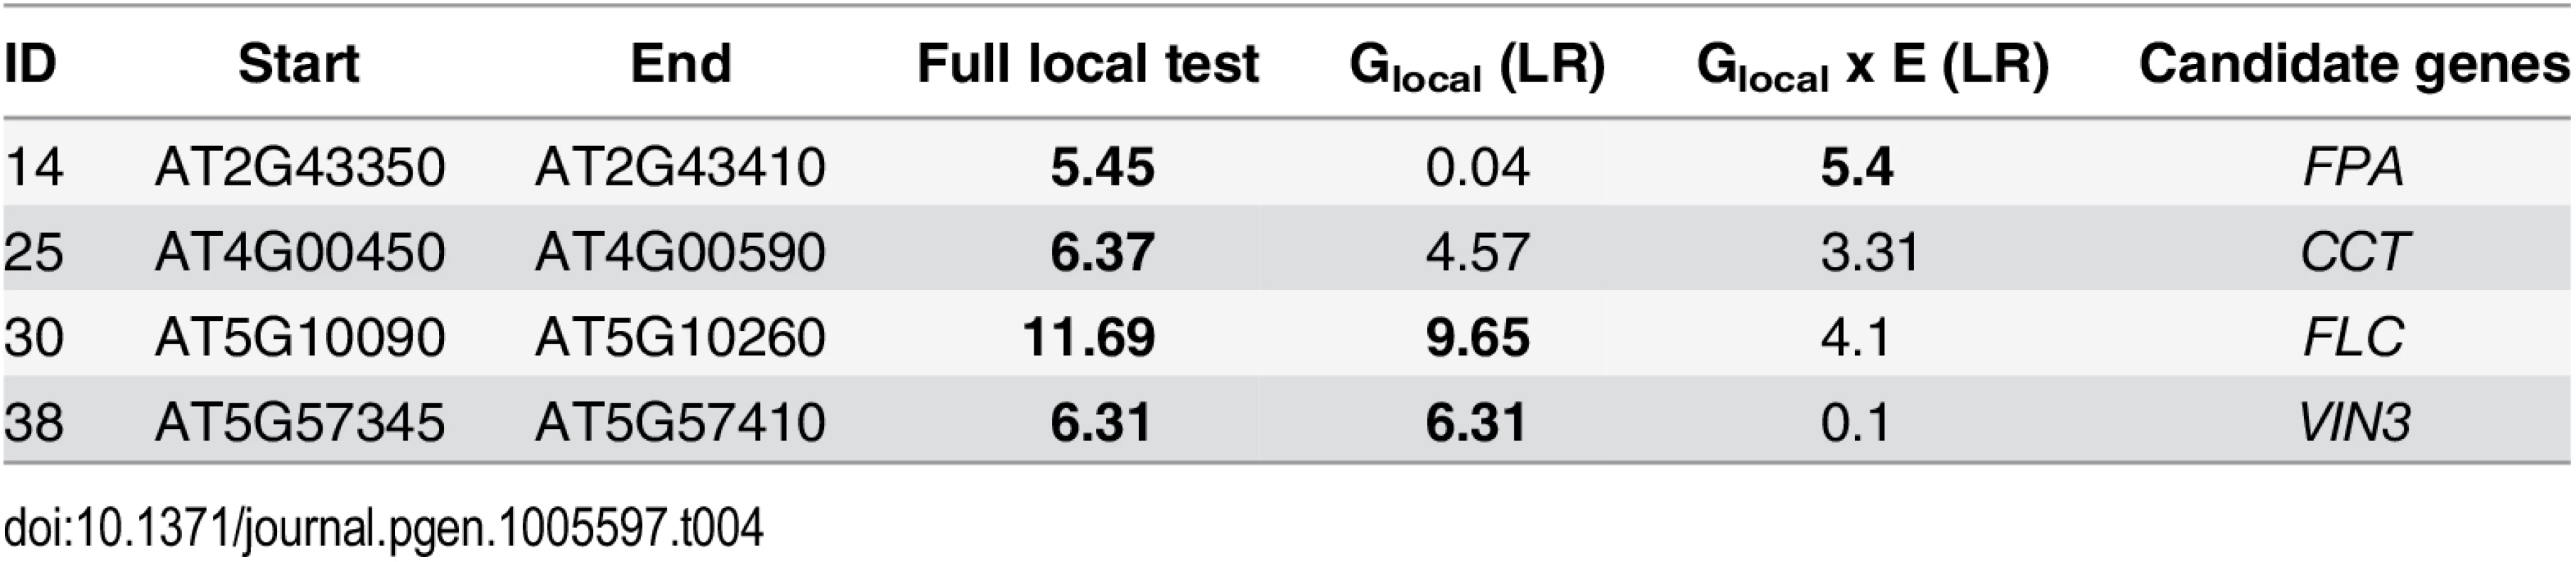 &lt;i&gt;A priori&lt;/i&gt; candidates identified at 20% FDR by local association test.